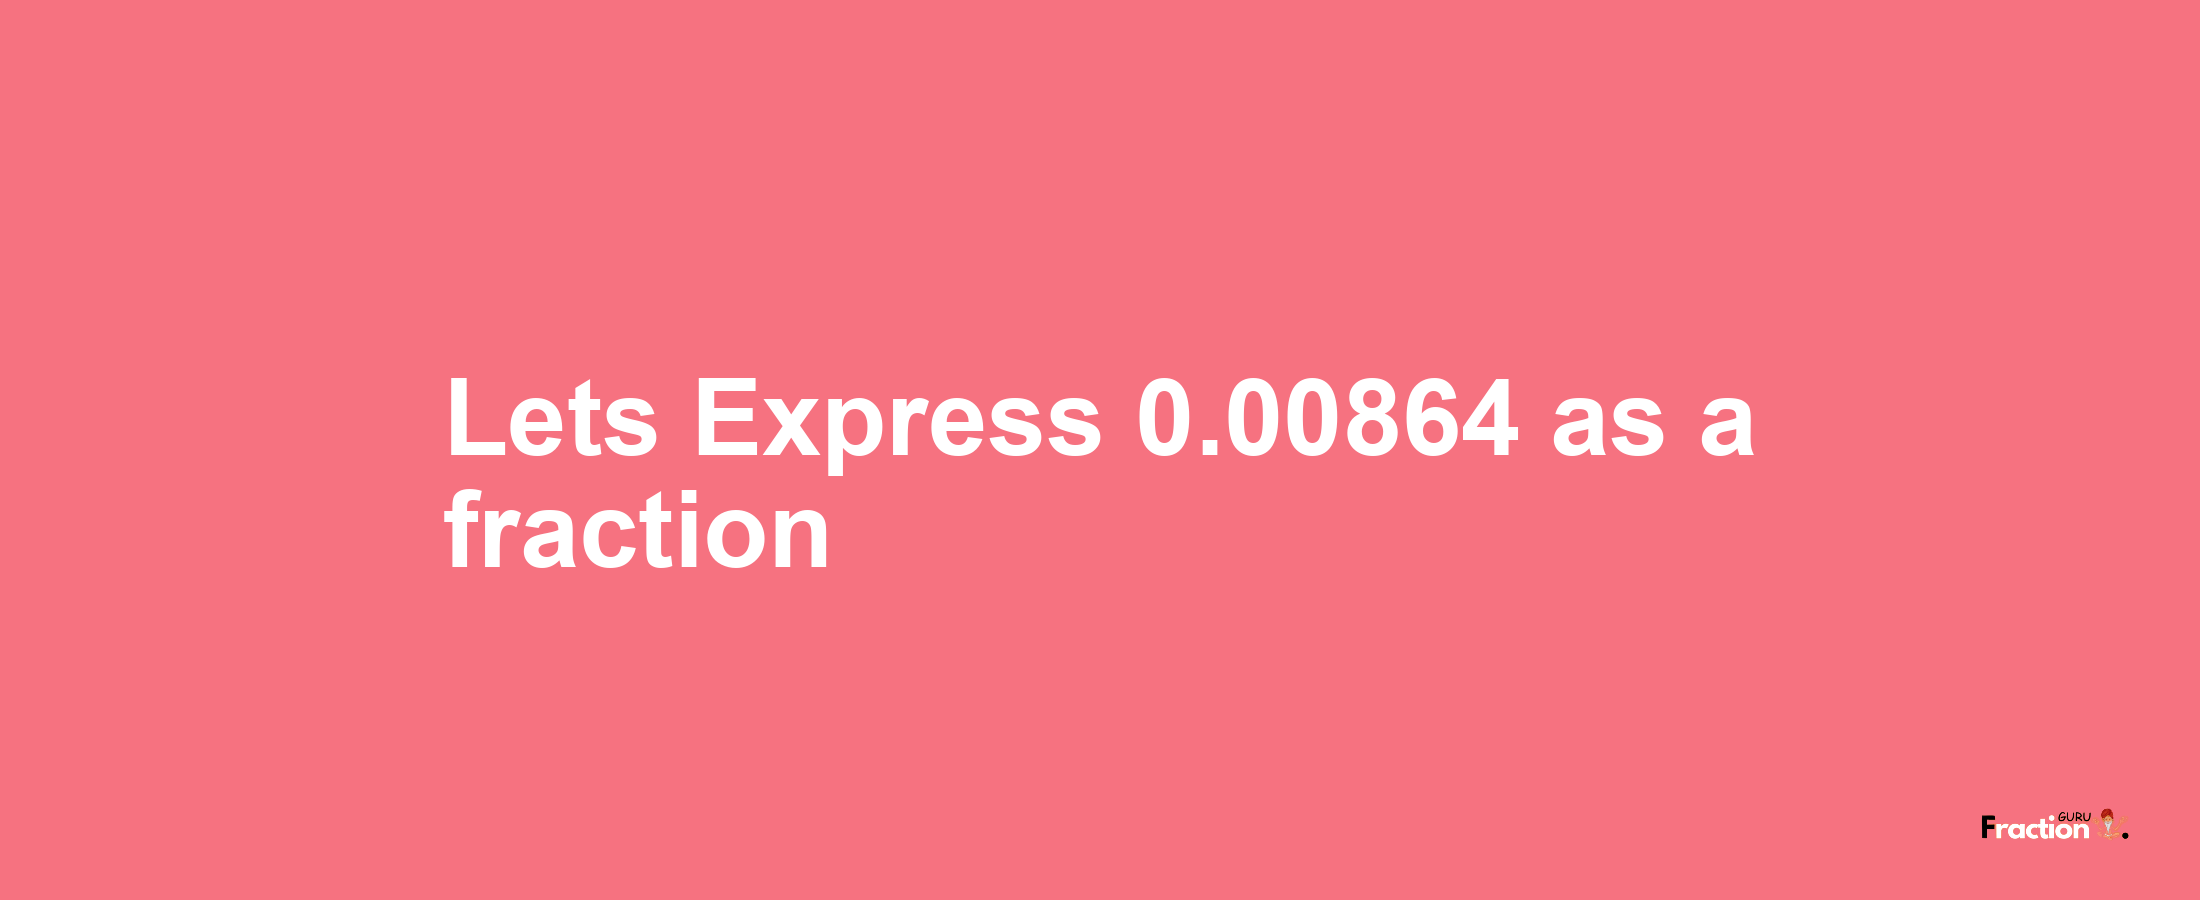 Lets Express 0.00864 as afraction